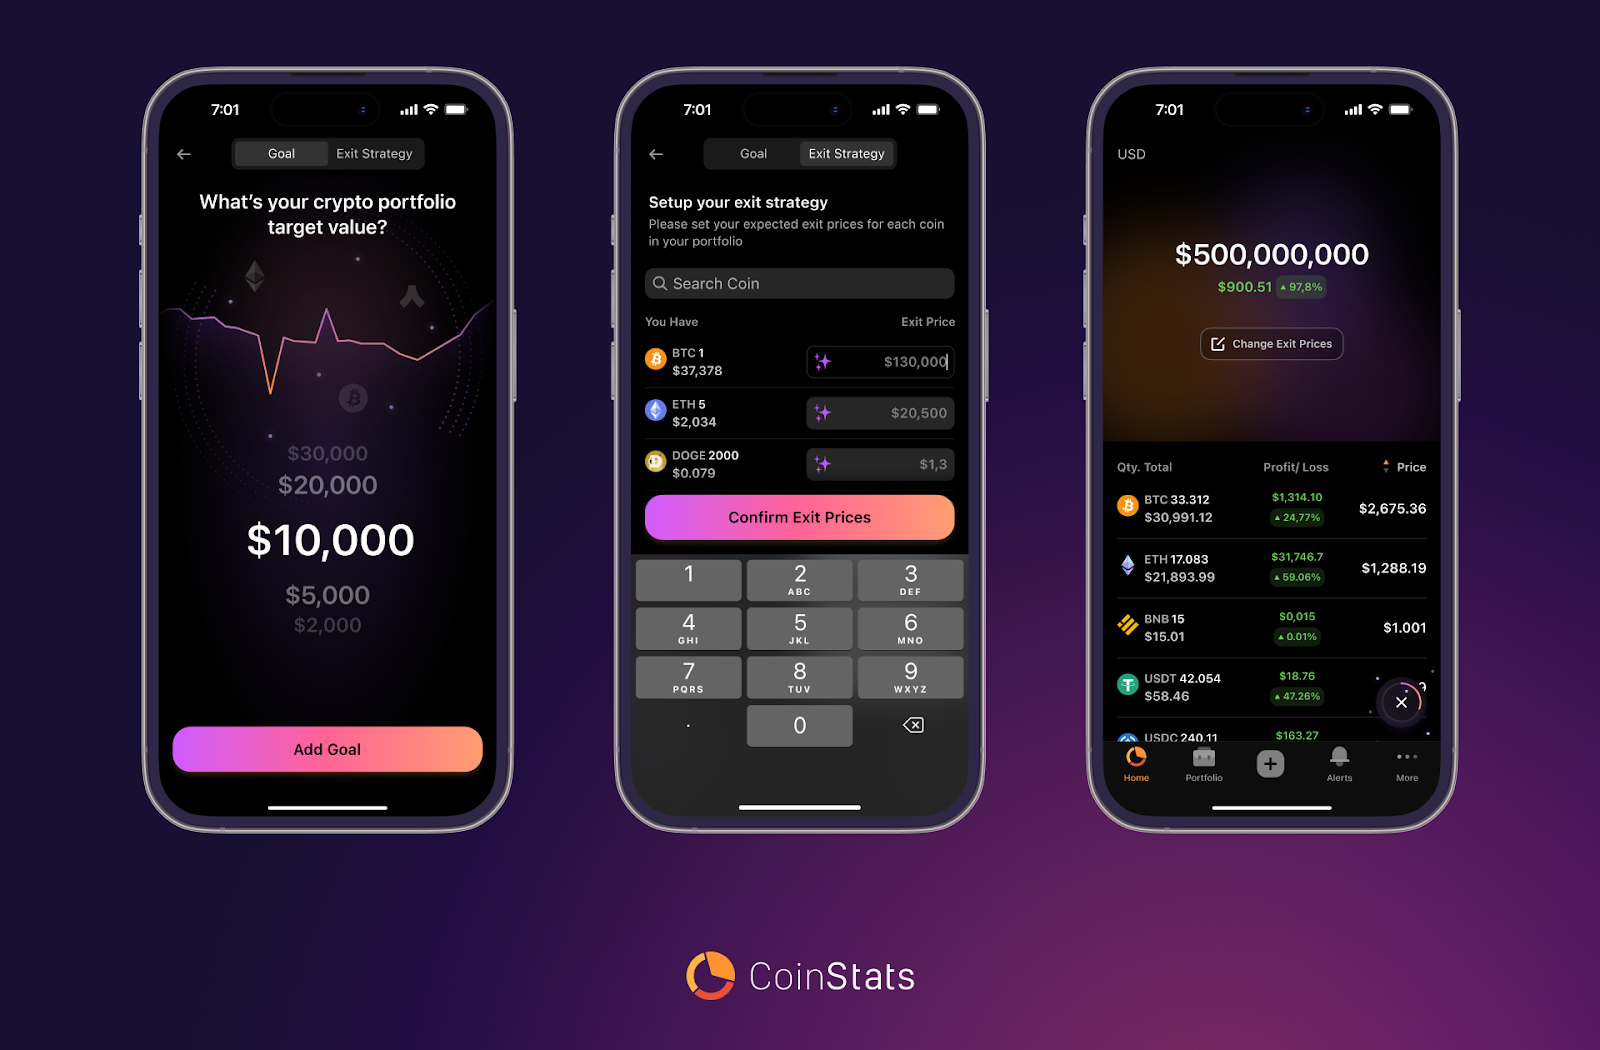 CoinStats Launches AI-powered Exit Strategy, CoinStats Launches AI-powered Exit Strategy Feature to Maximize User Profits